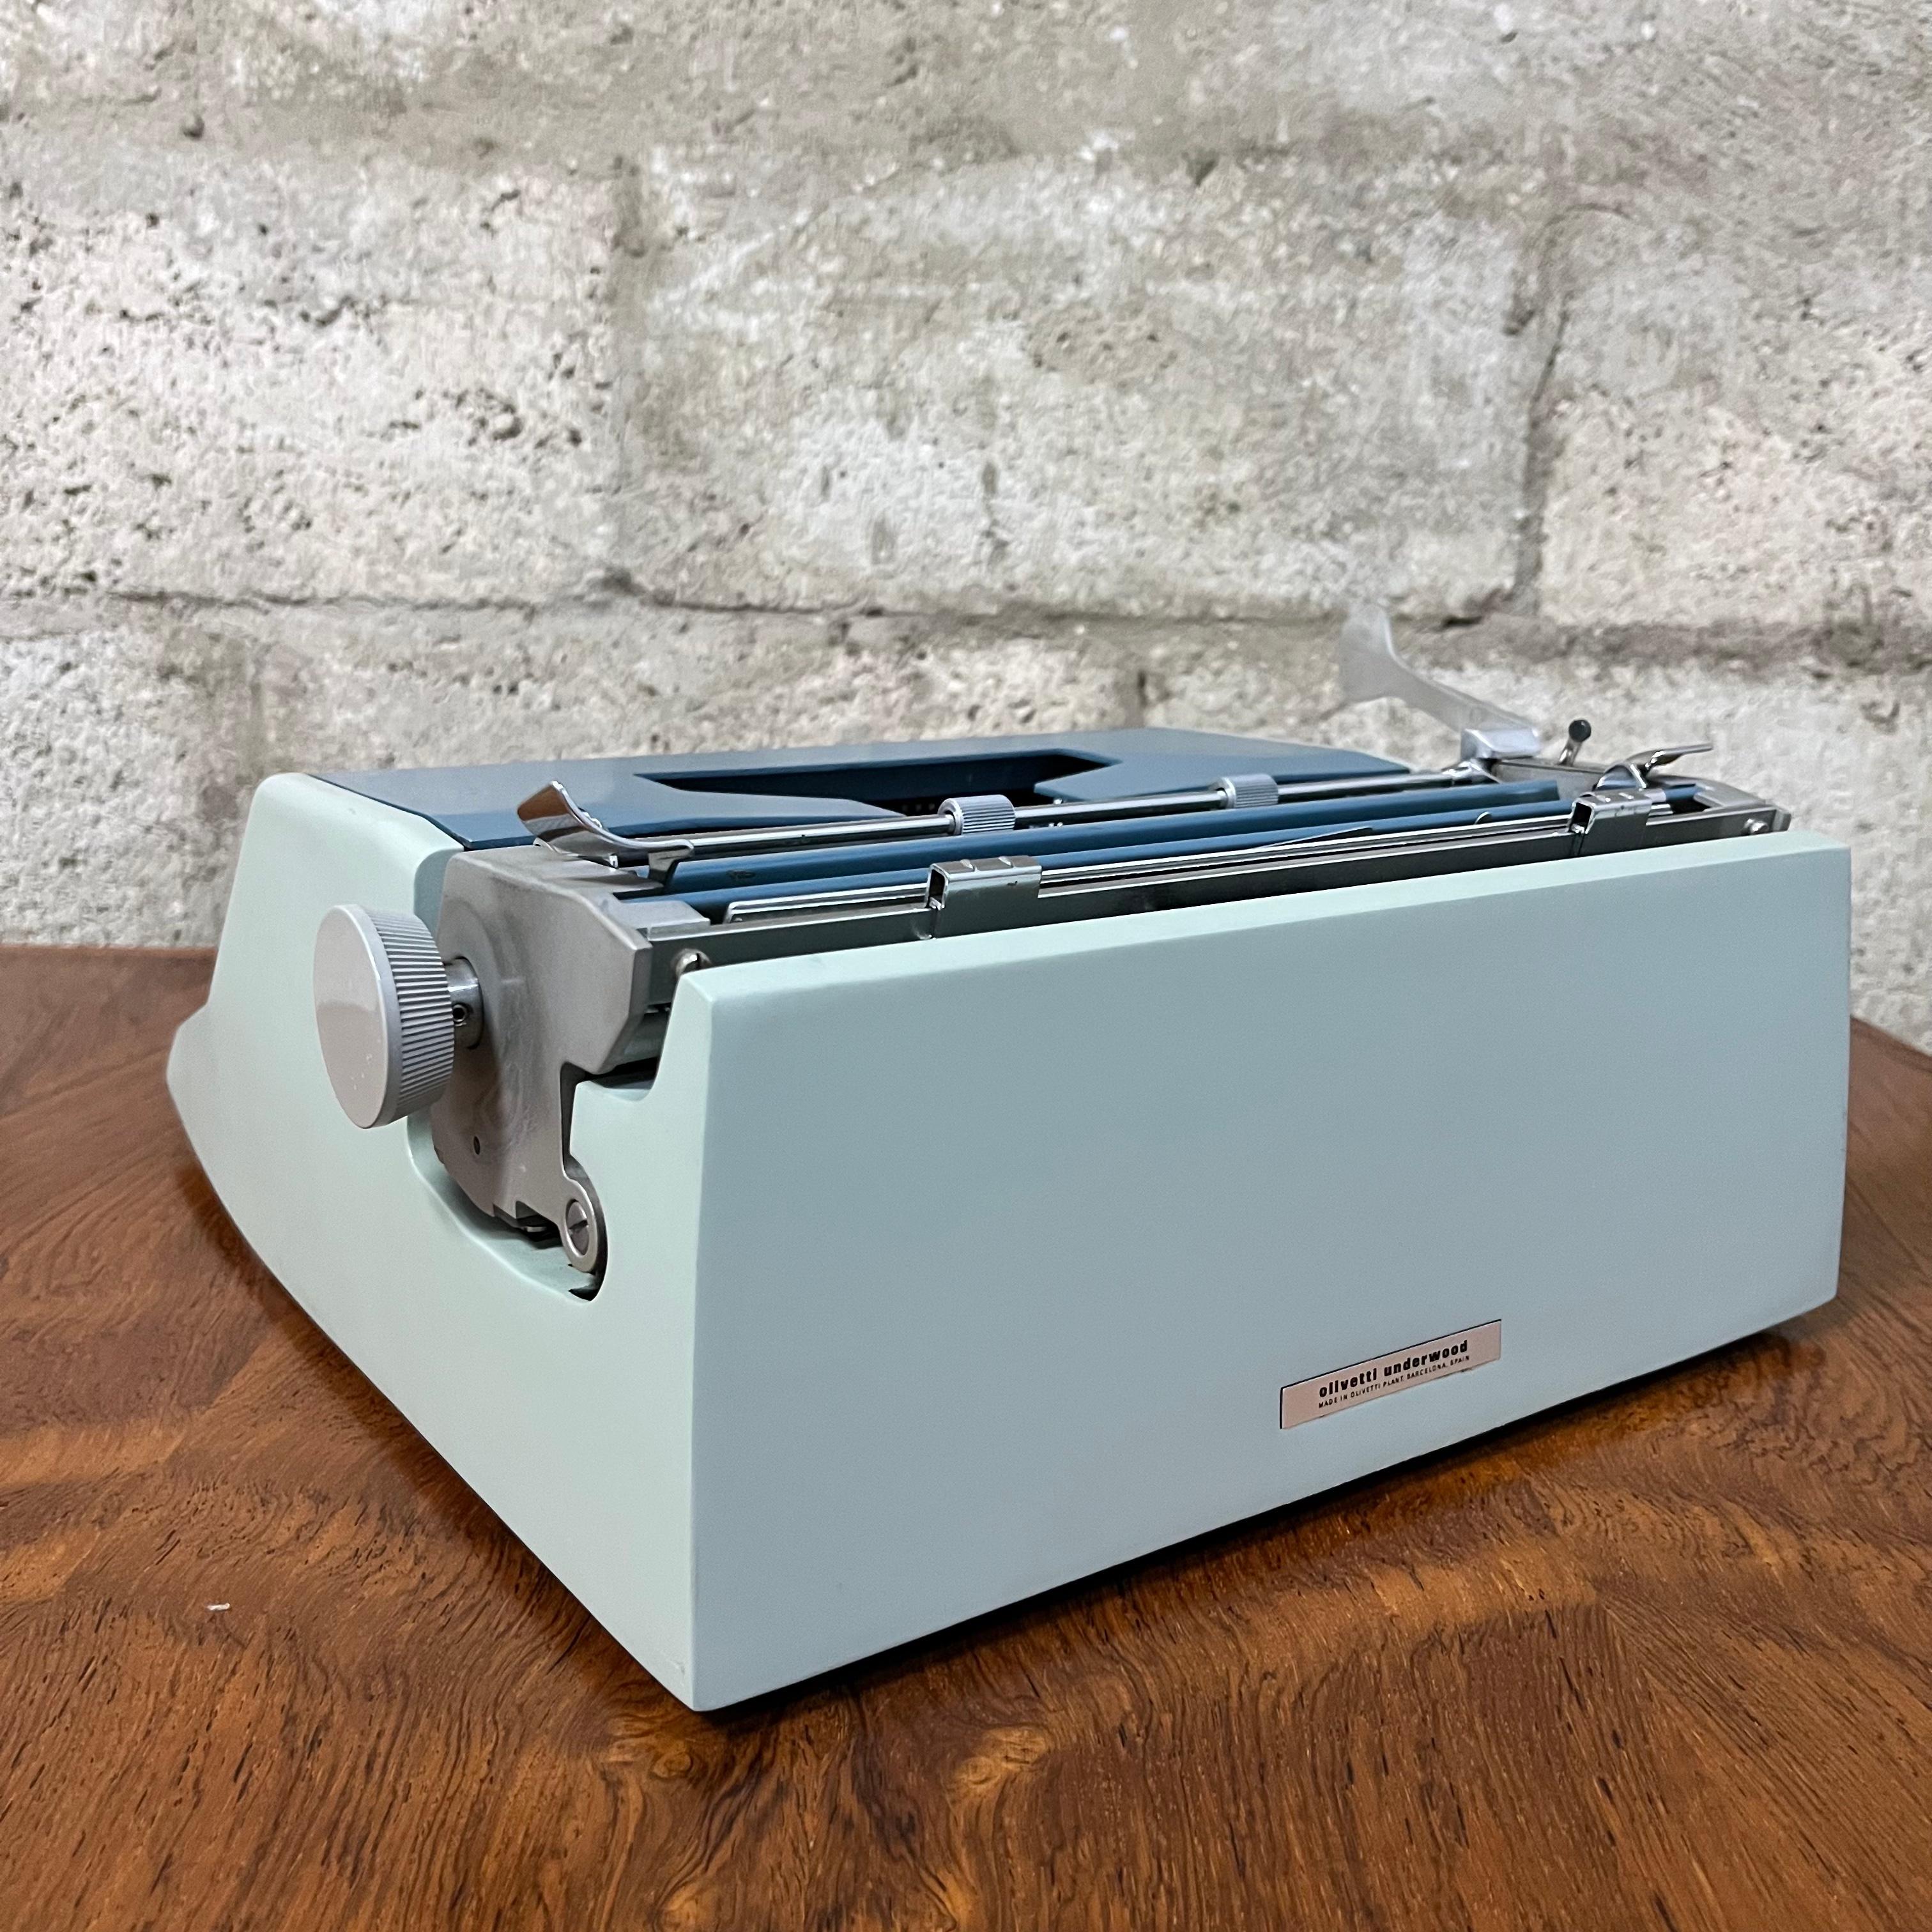 1960s Olivetti Underwood 21 Portable Typewriter With Original Travel Case For Sale 5